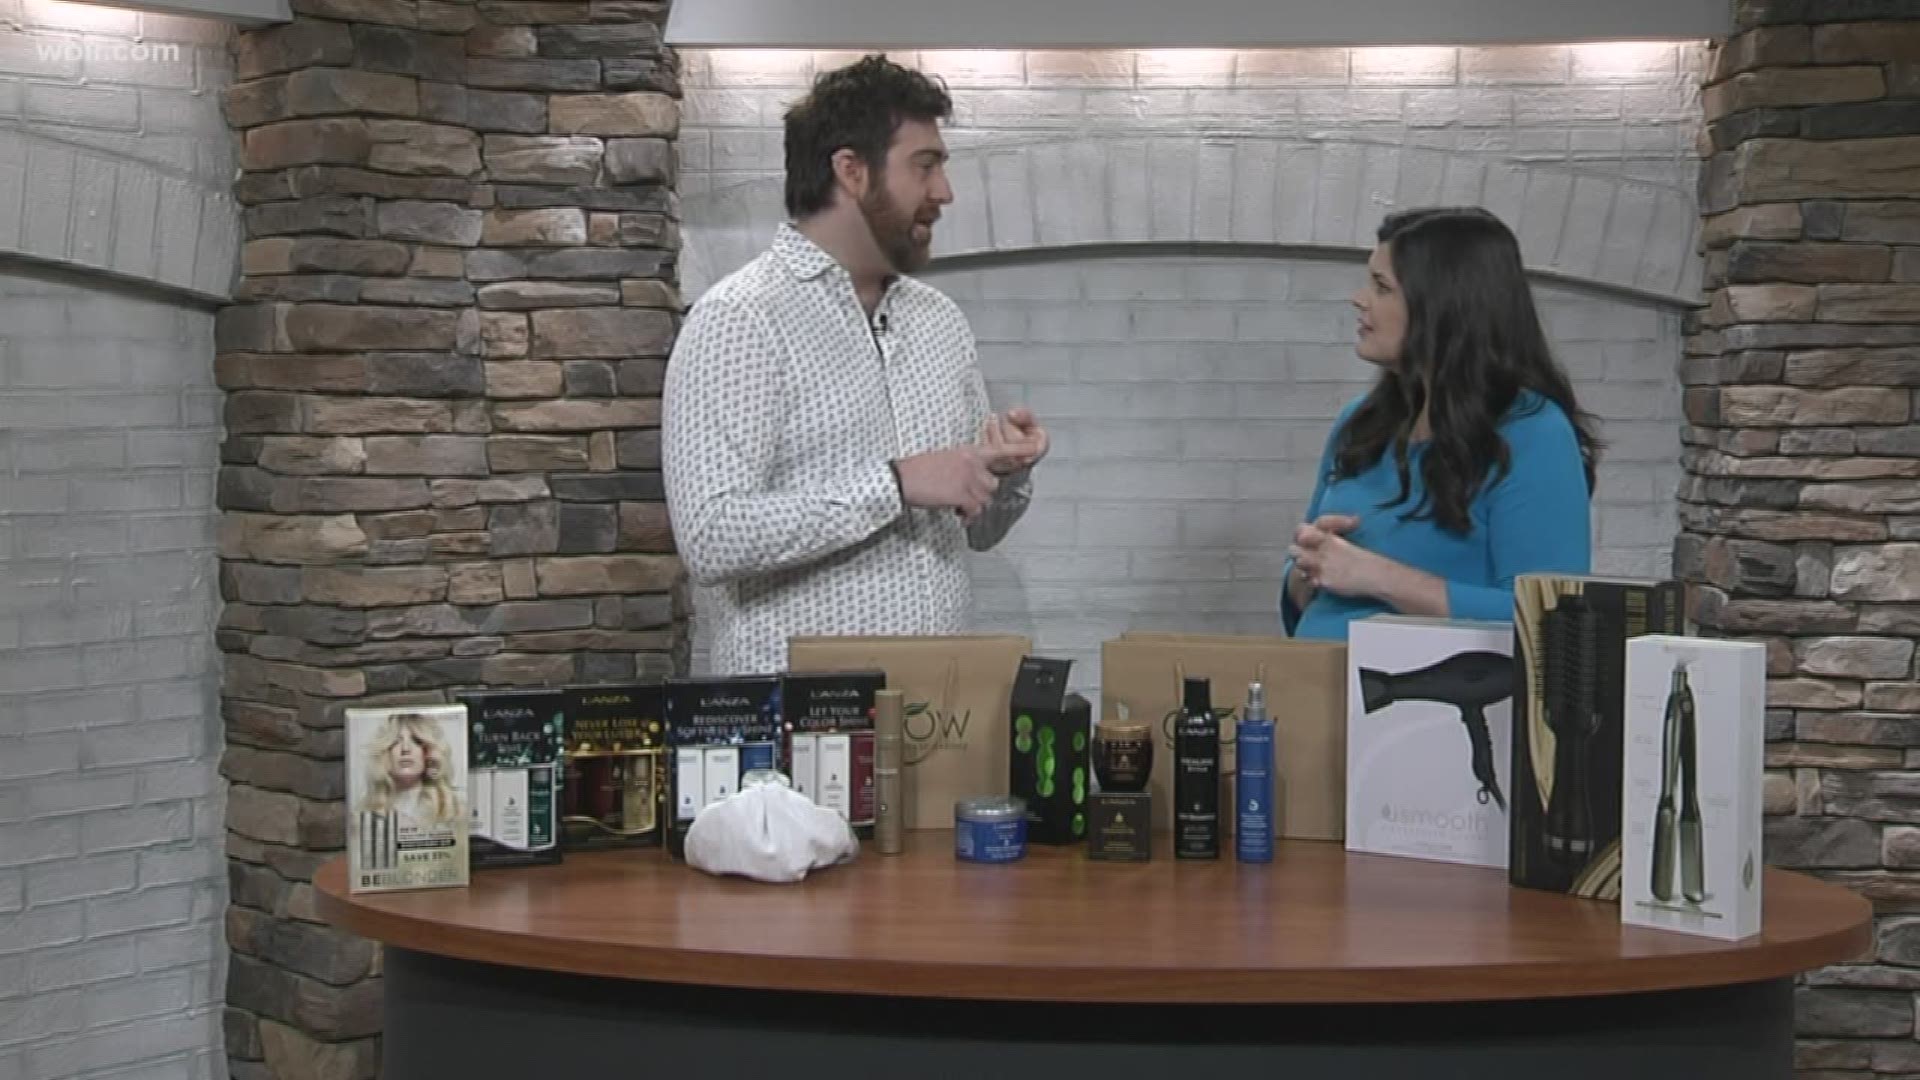 Shane Archer from Grow Knoxville shares some tips on beating winter hair.